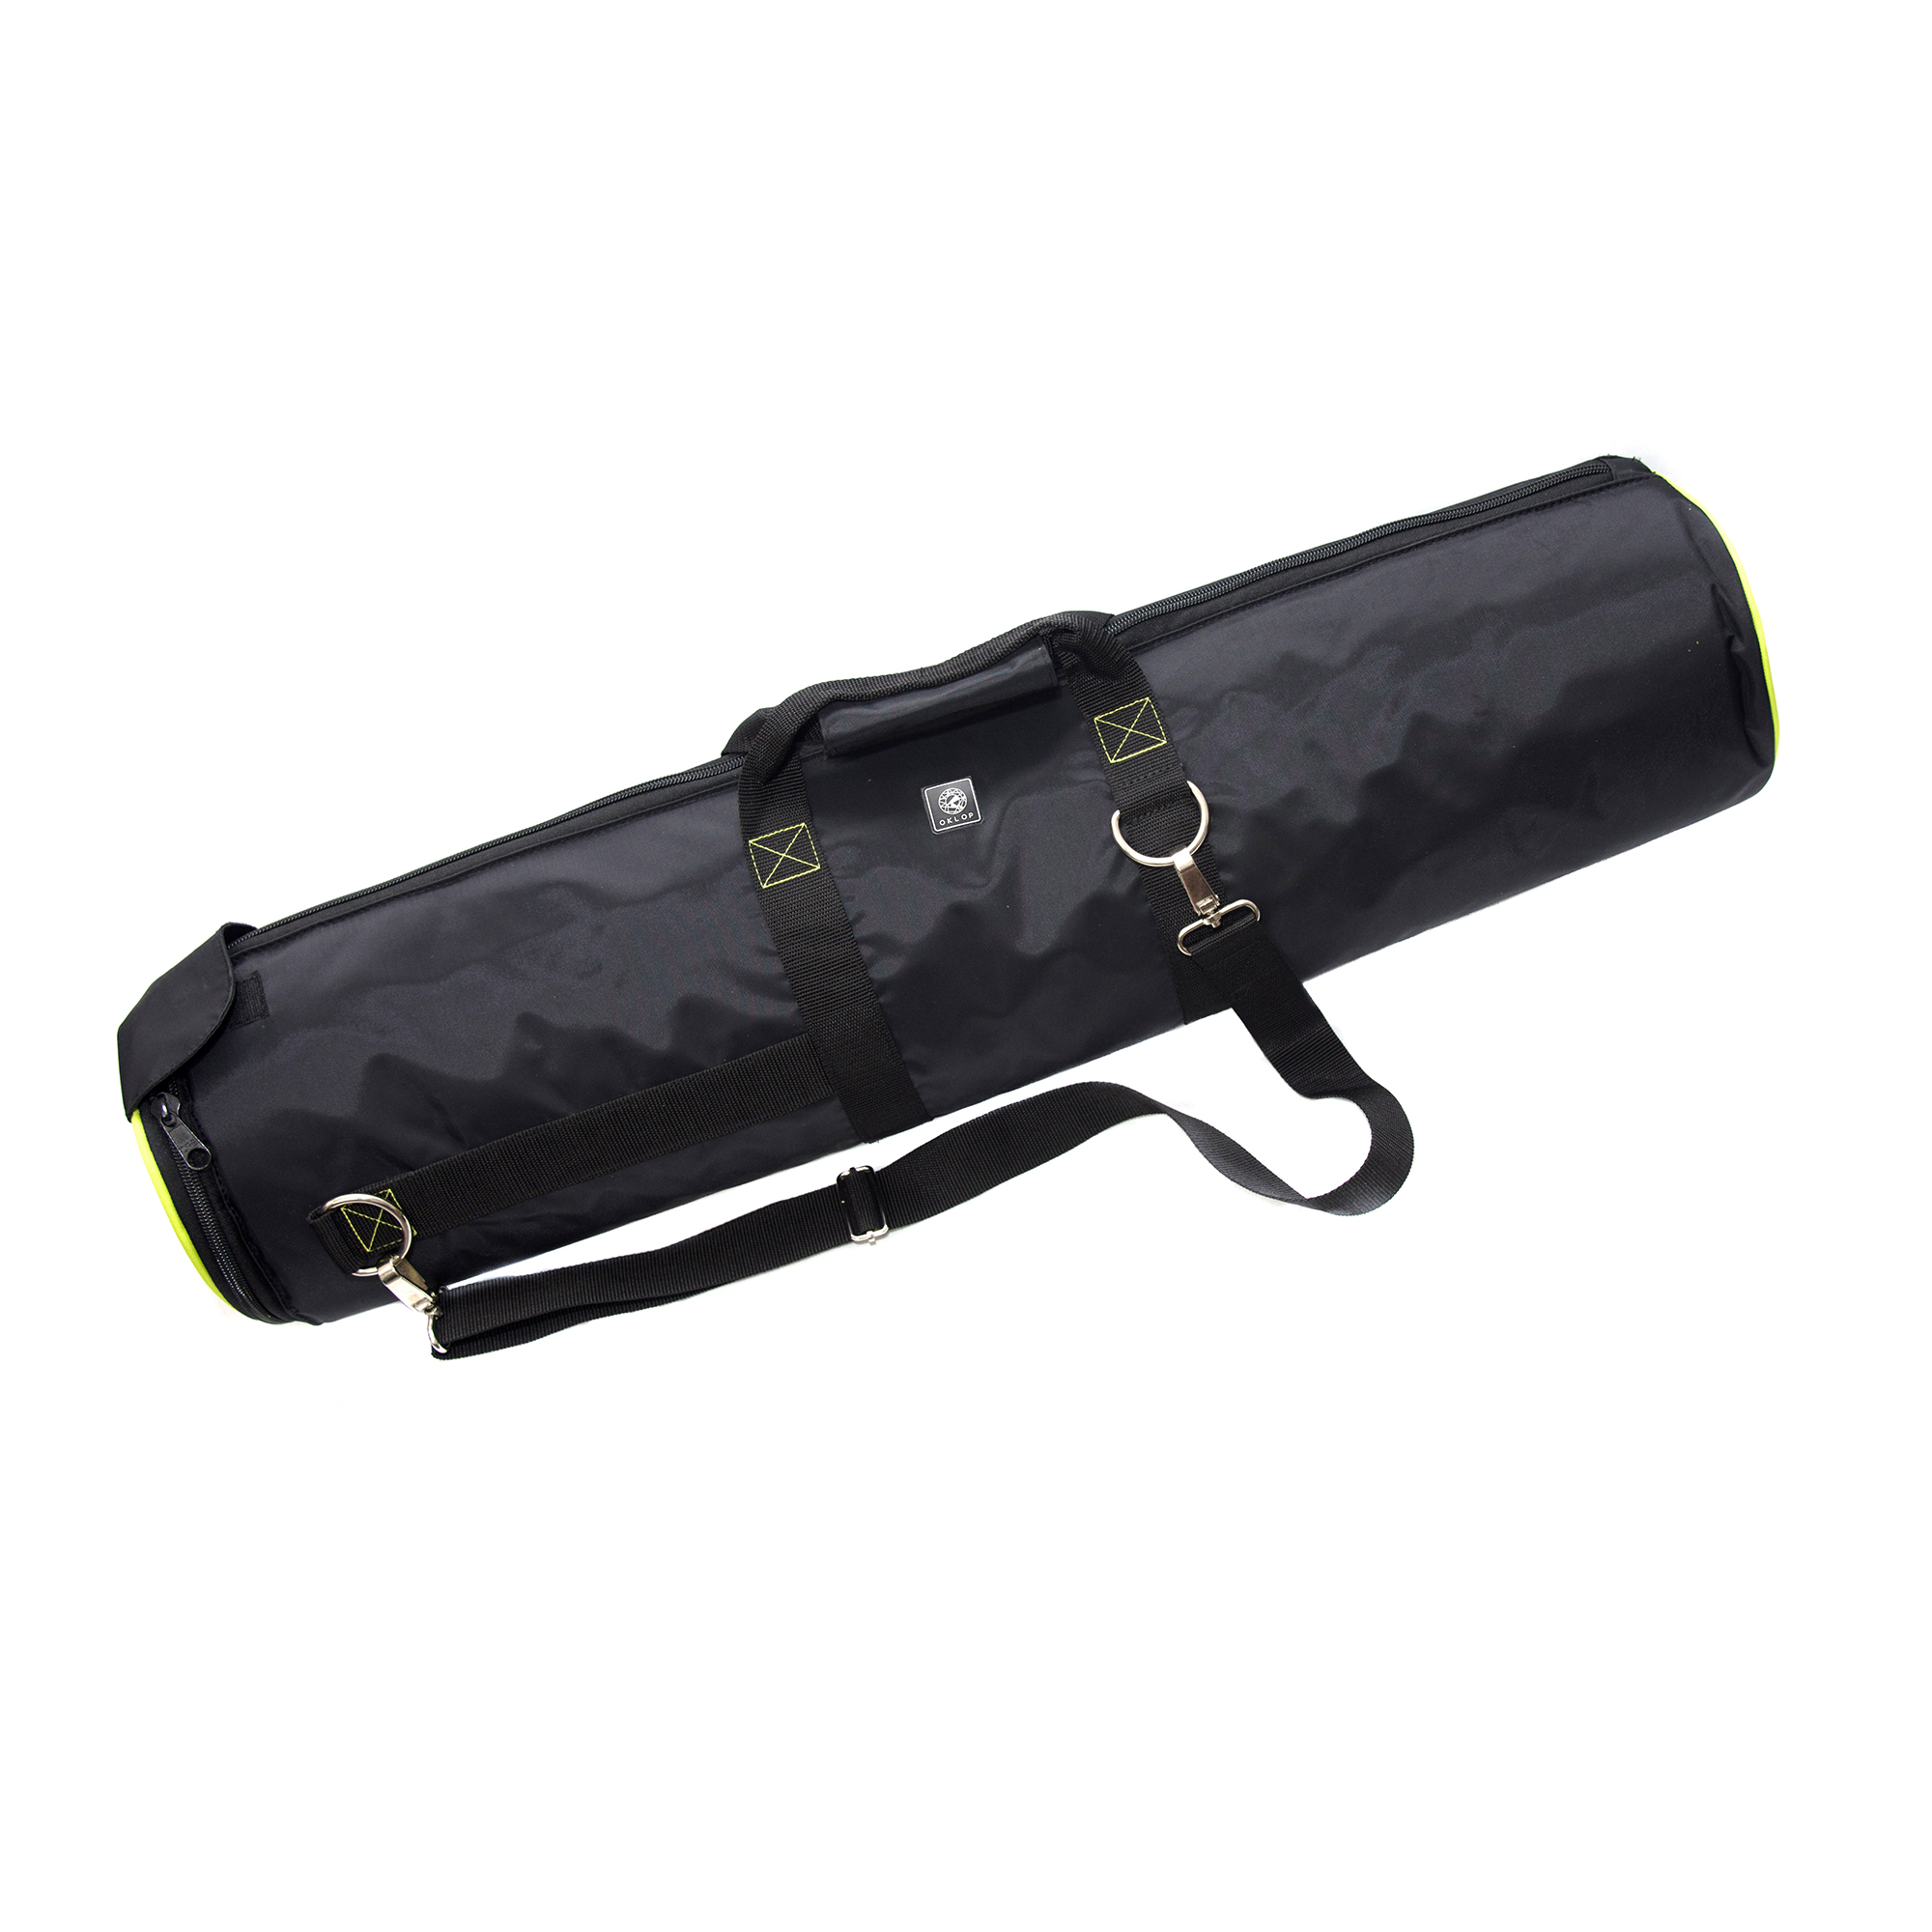 Oklop Padded Bag for 100/900 APO Refractors